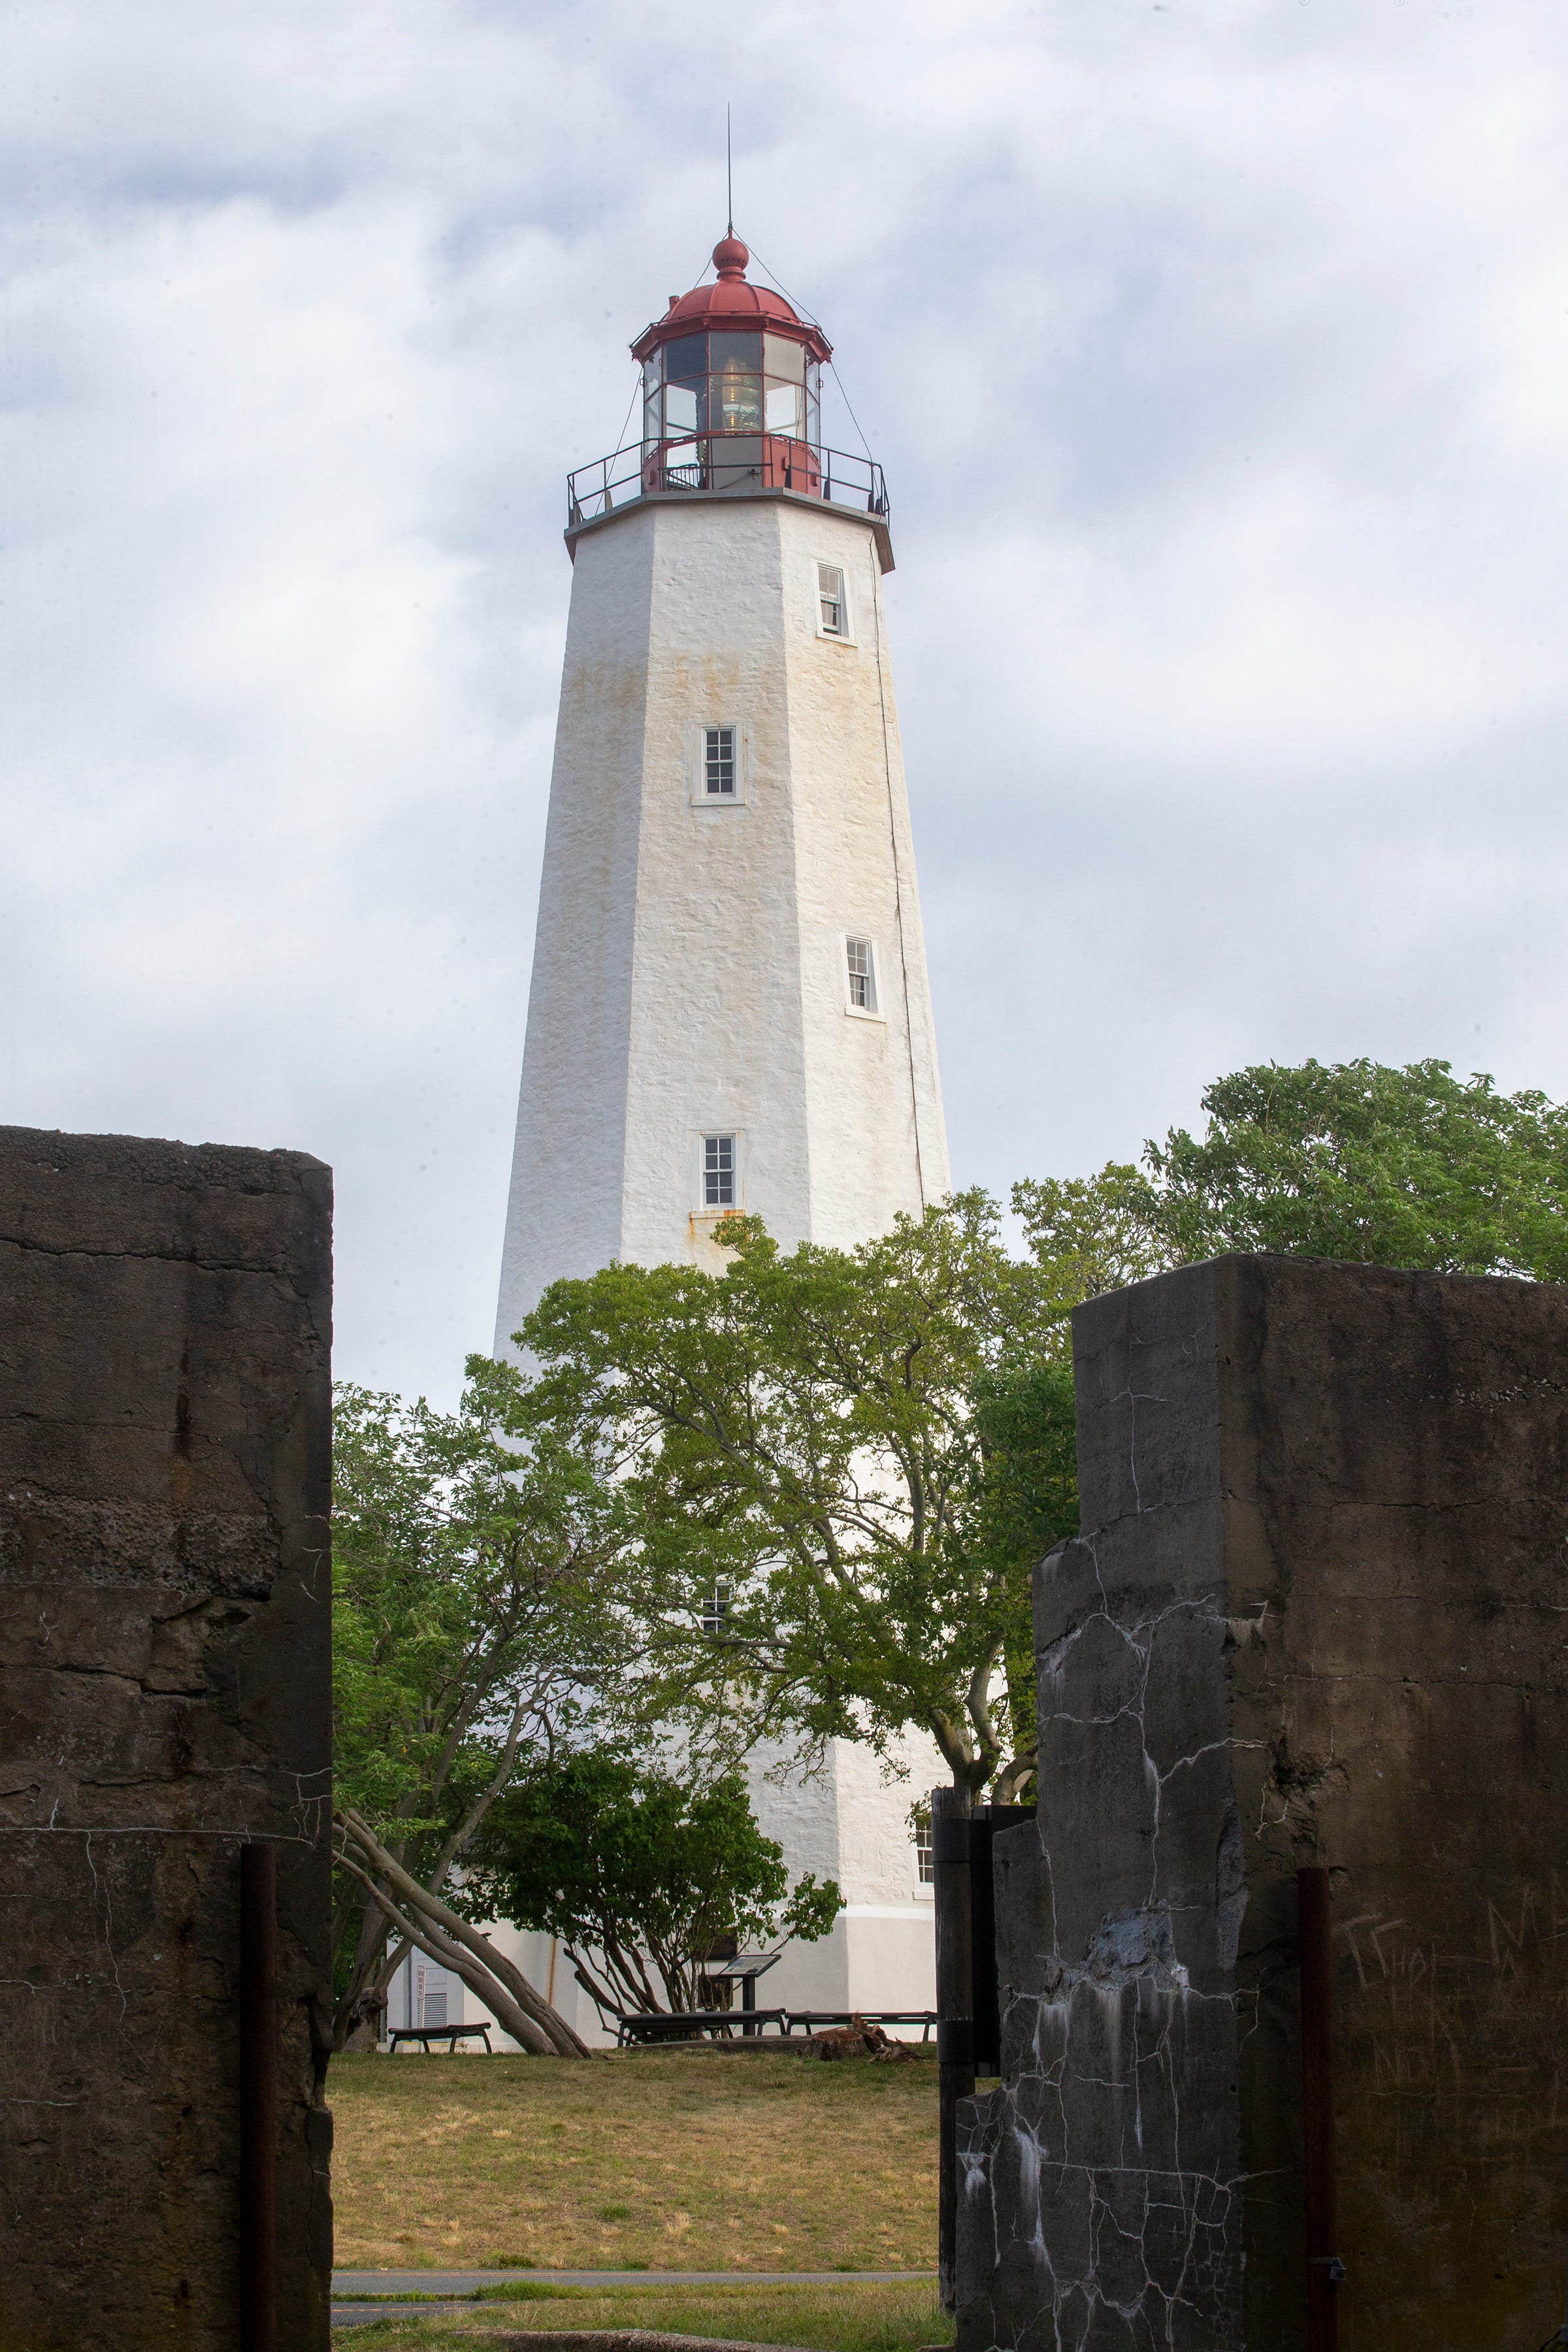 The Sandy Hook Lighthouse at Fort Hancock, which is part of the Gateway National Recreation Area Sandy Hook Unit, in Sandy Hook. Bruce Springsteen was arrested at the Lighthouse in late 2020, and charges were dismissed.